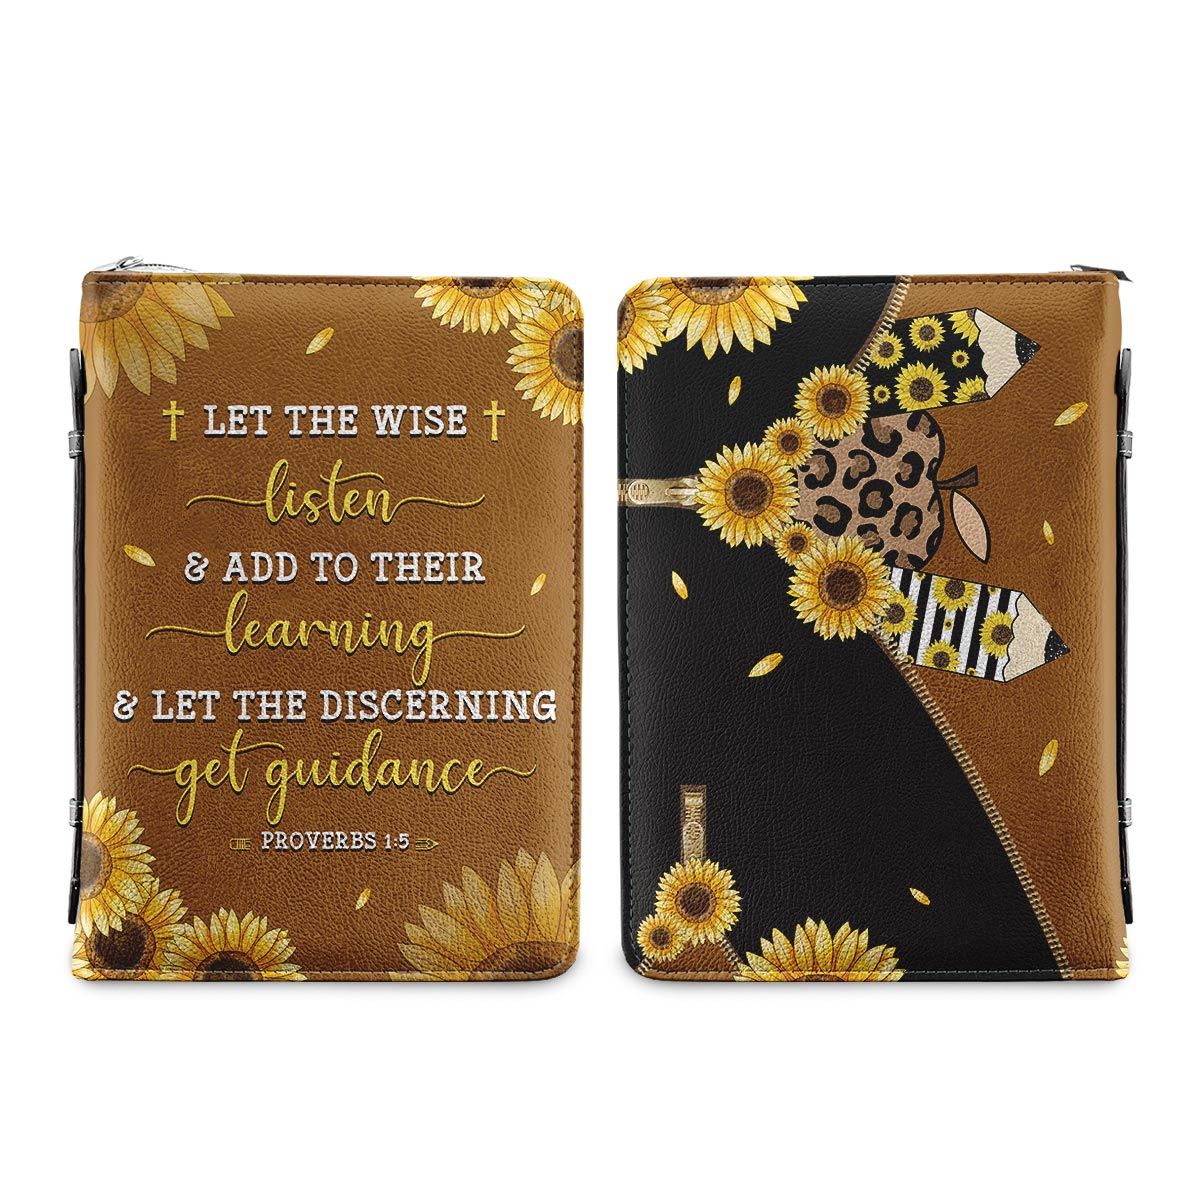 Let The Wise Listen And Add To Their Learning And Let The Discerning Get Guidance Proverbs 1 5 Personalized Bible Cover